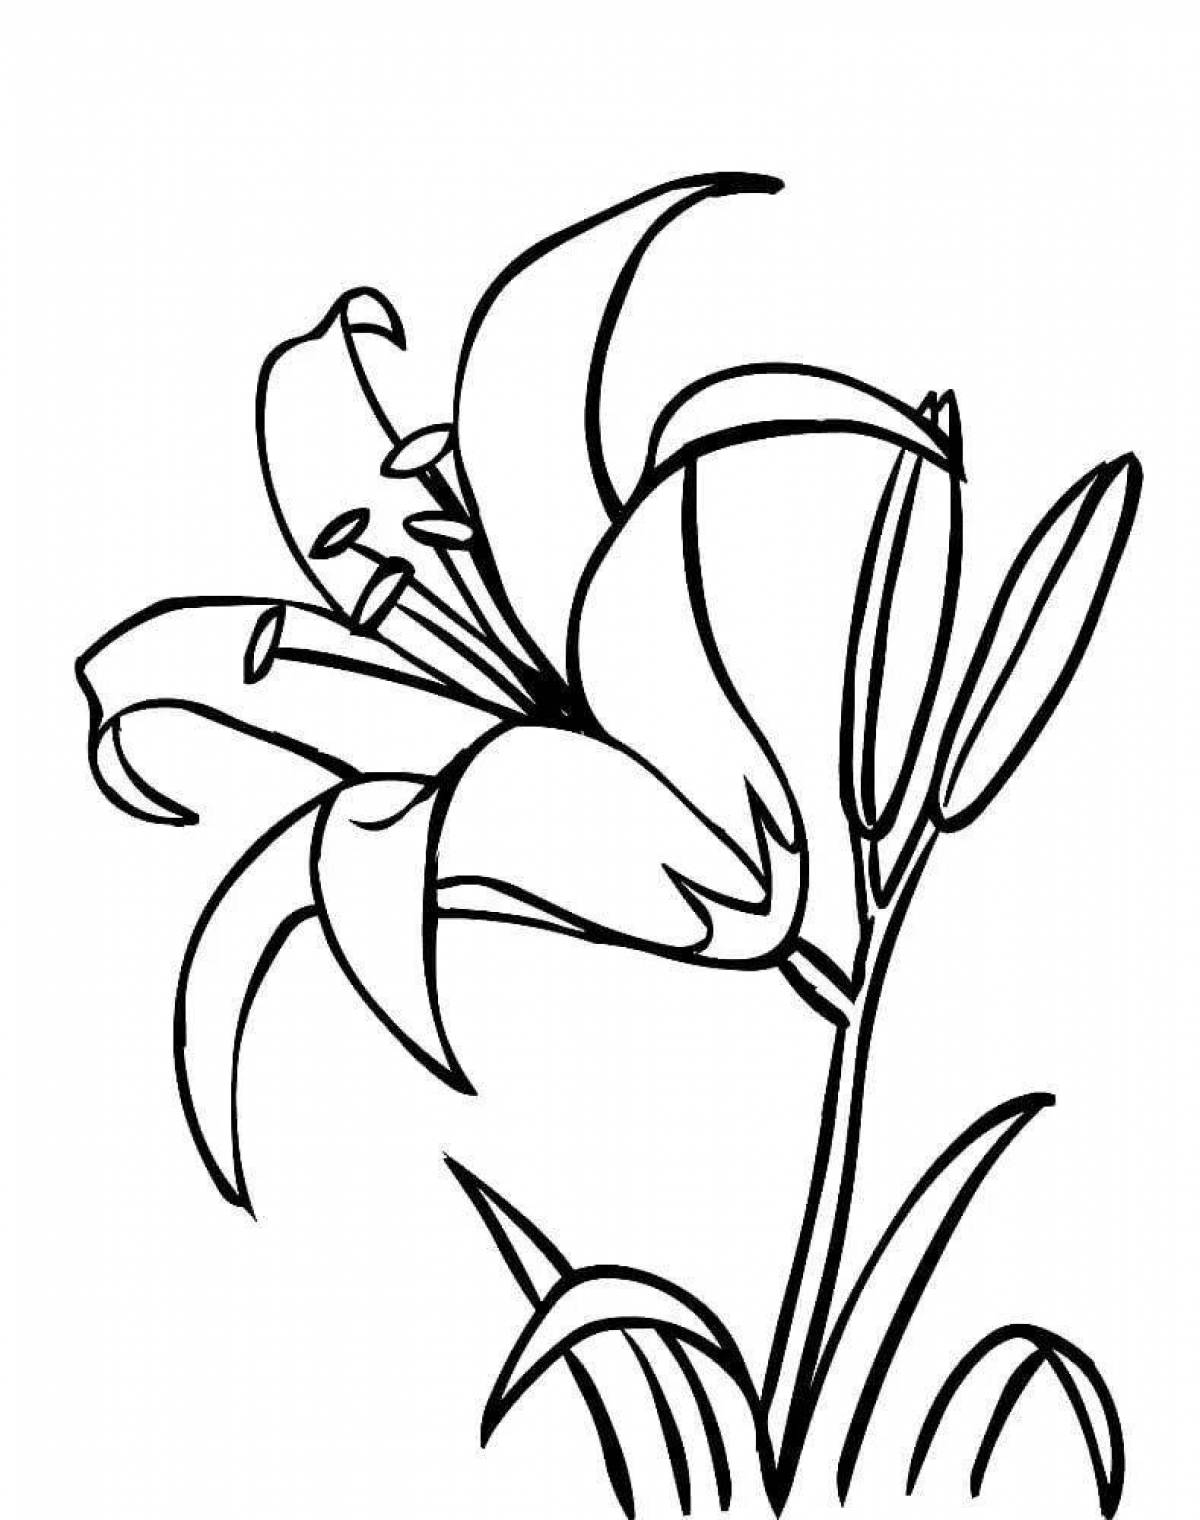 Little lily coloring pages for kids